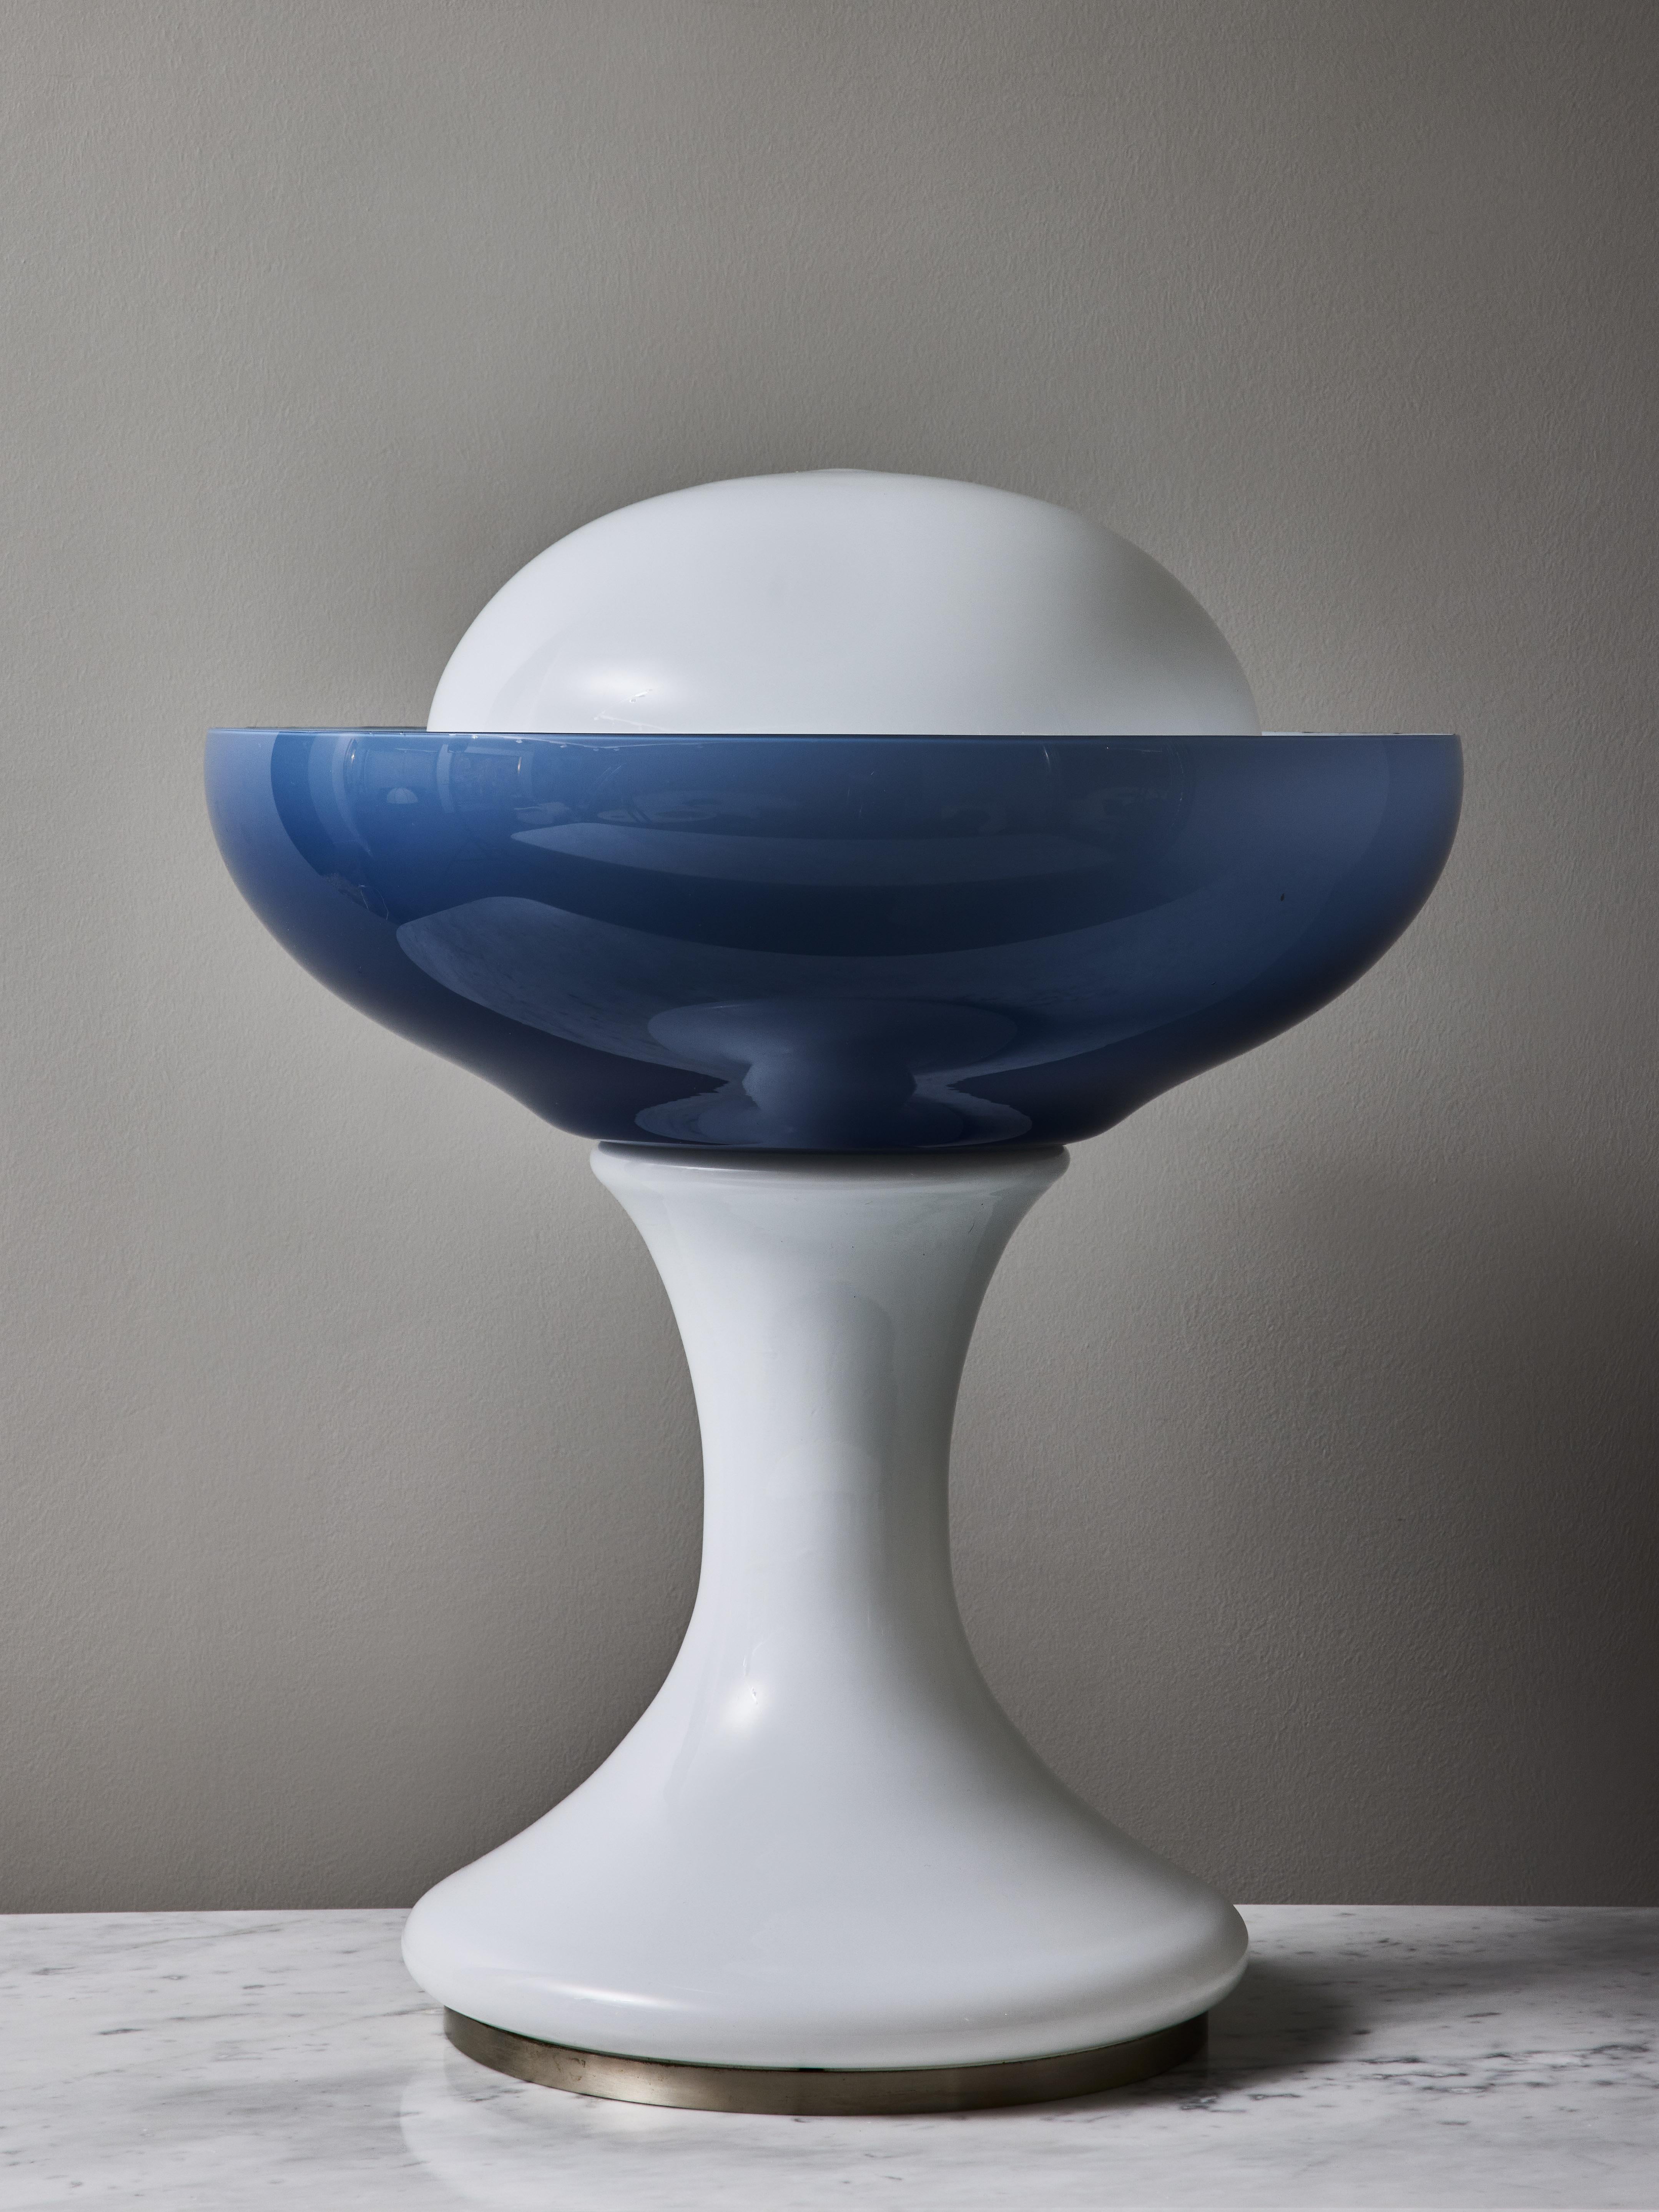 Beautiful floor lamp made of stacked opaline Murano glass. The curved shape of the body ends up with a blue cup giving a loverly hue when the piece is enlightened.